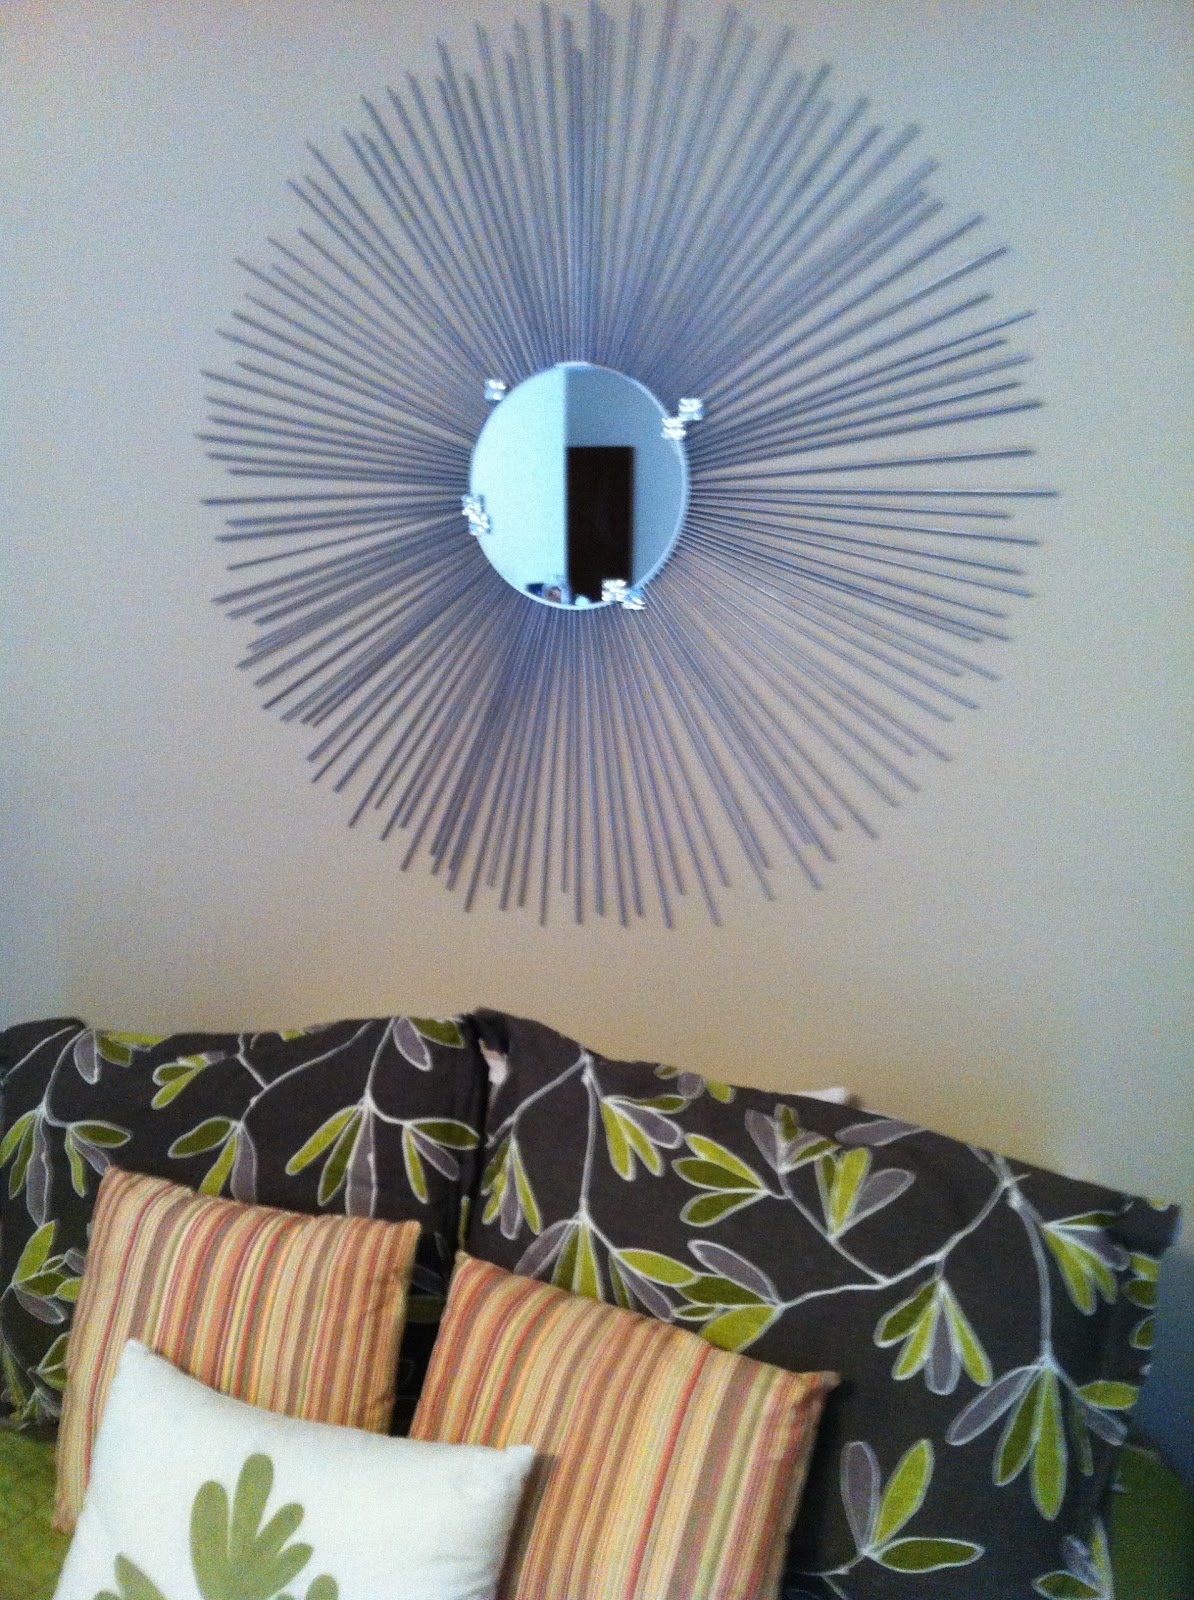 DIY Projects to Save Money on Retail: Starburst Mirror for $34 | Your